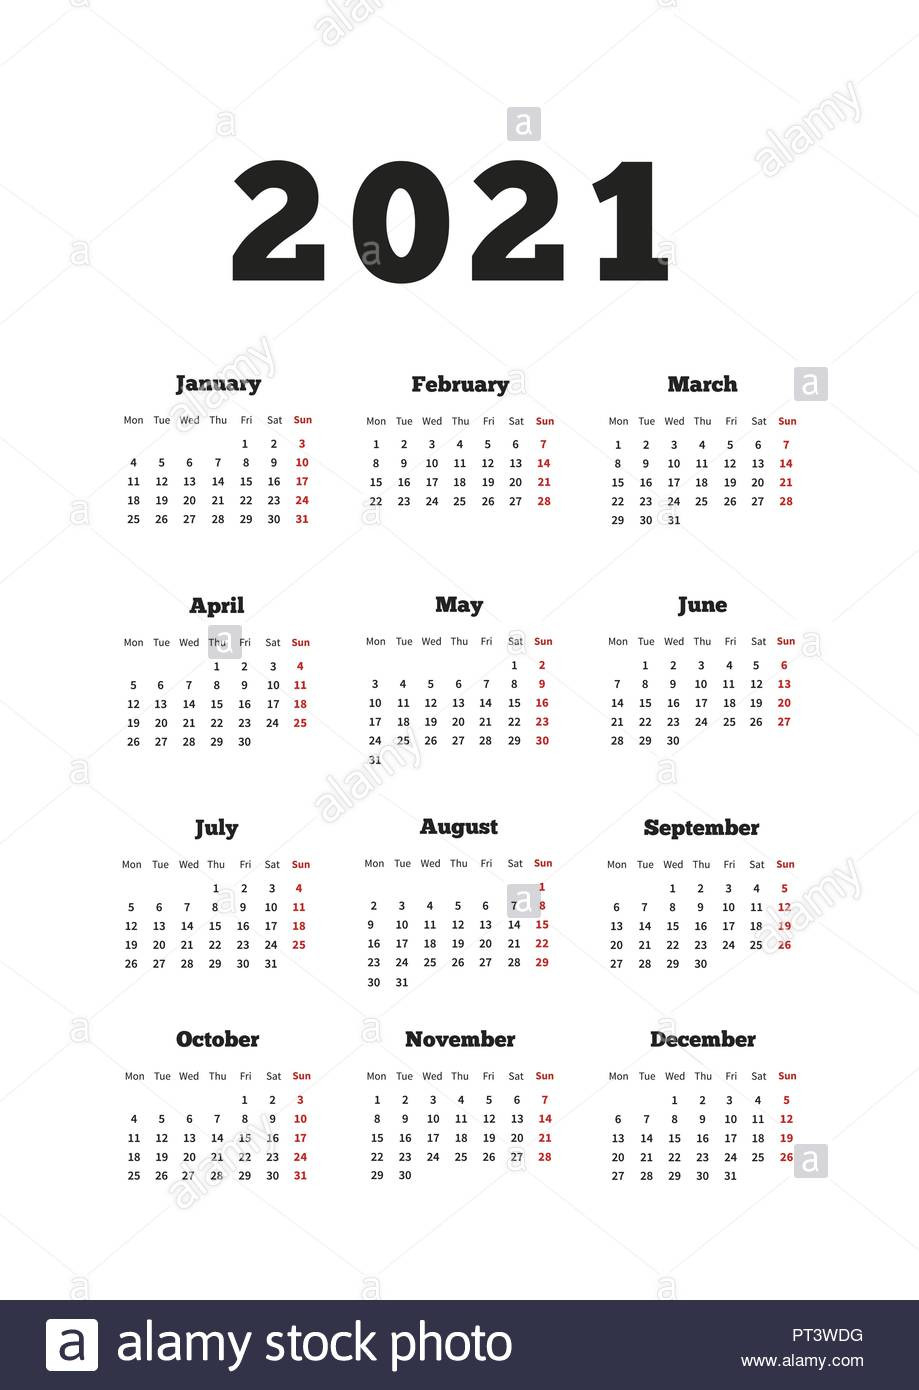 Monday To Friday Calendar 2021 | Christmas Day 2020-Monday To Friday August 2021 Calendar